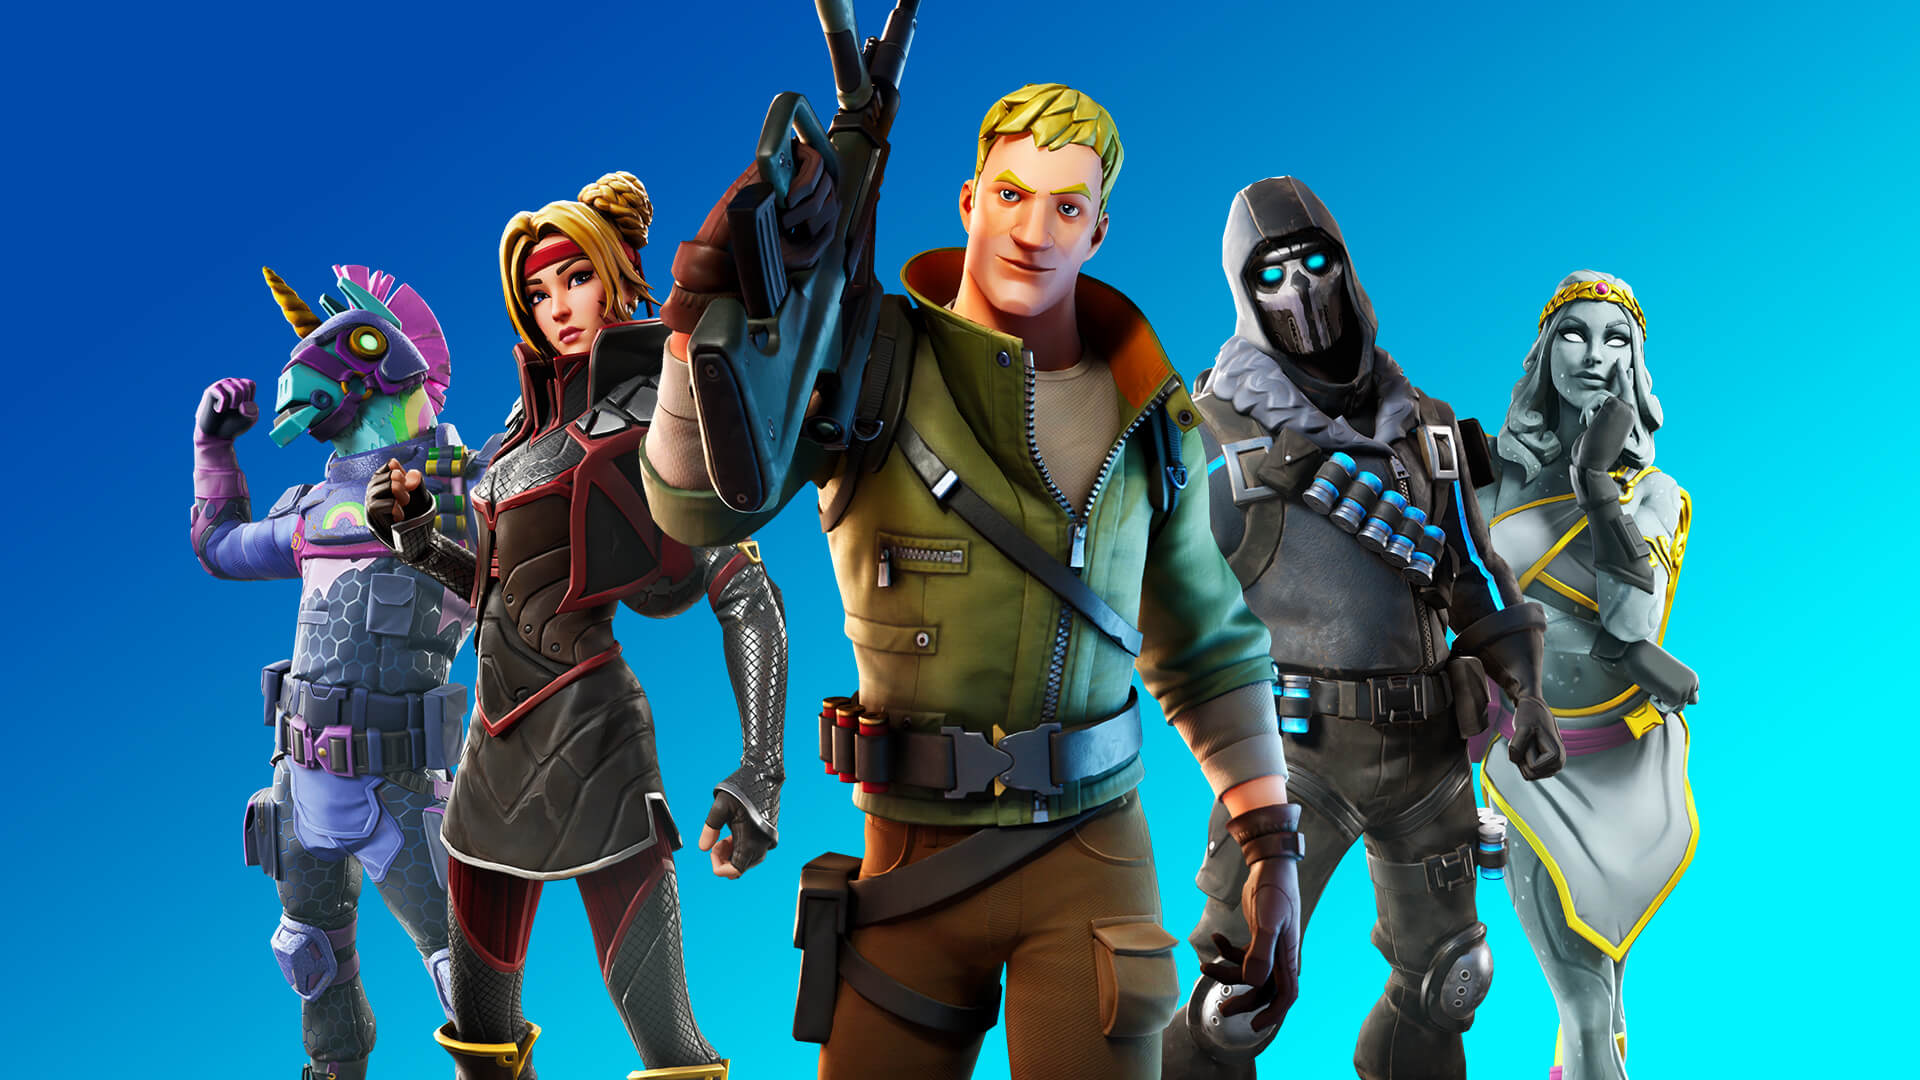 Image for Epic Games eyes Fortnite movie as it begins expansion into wider entertainment media